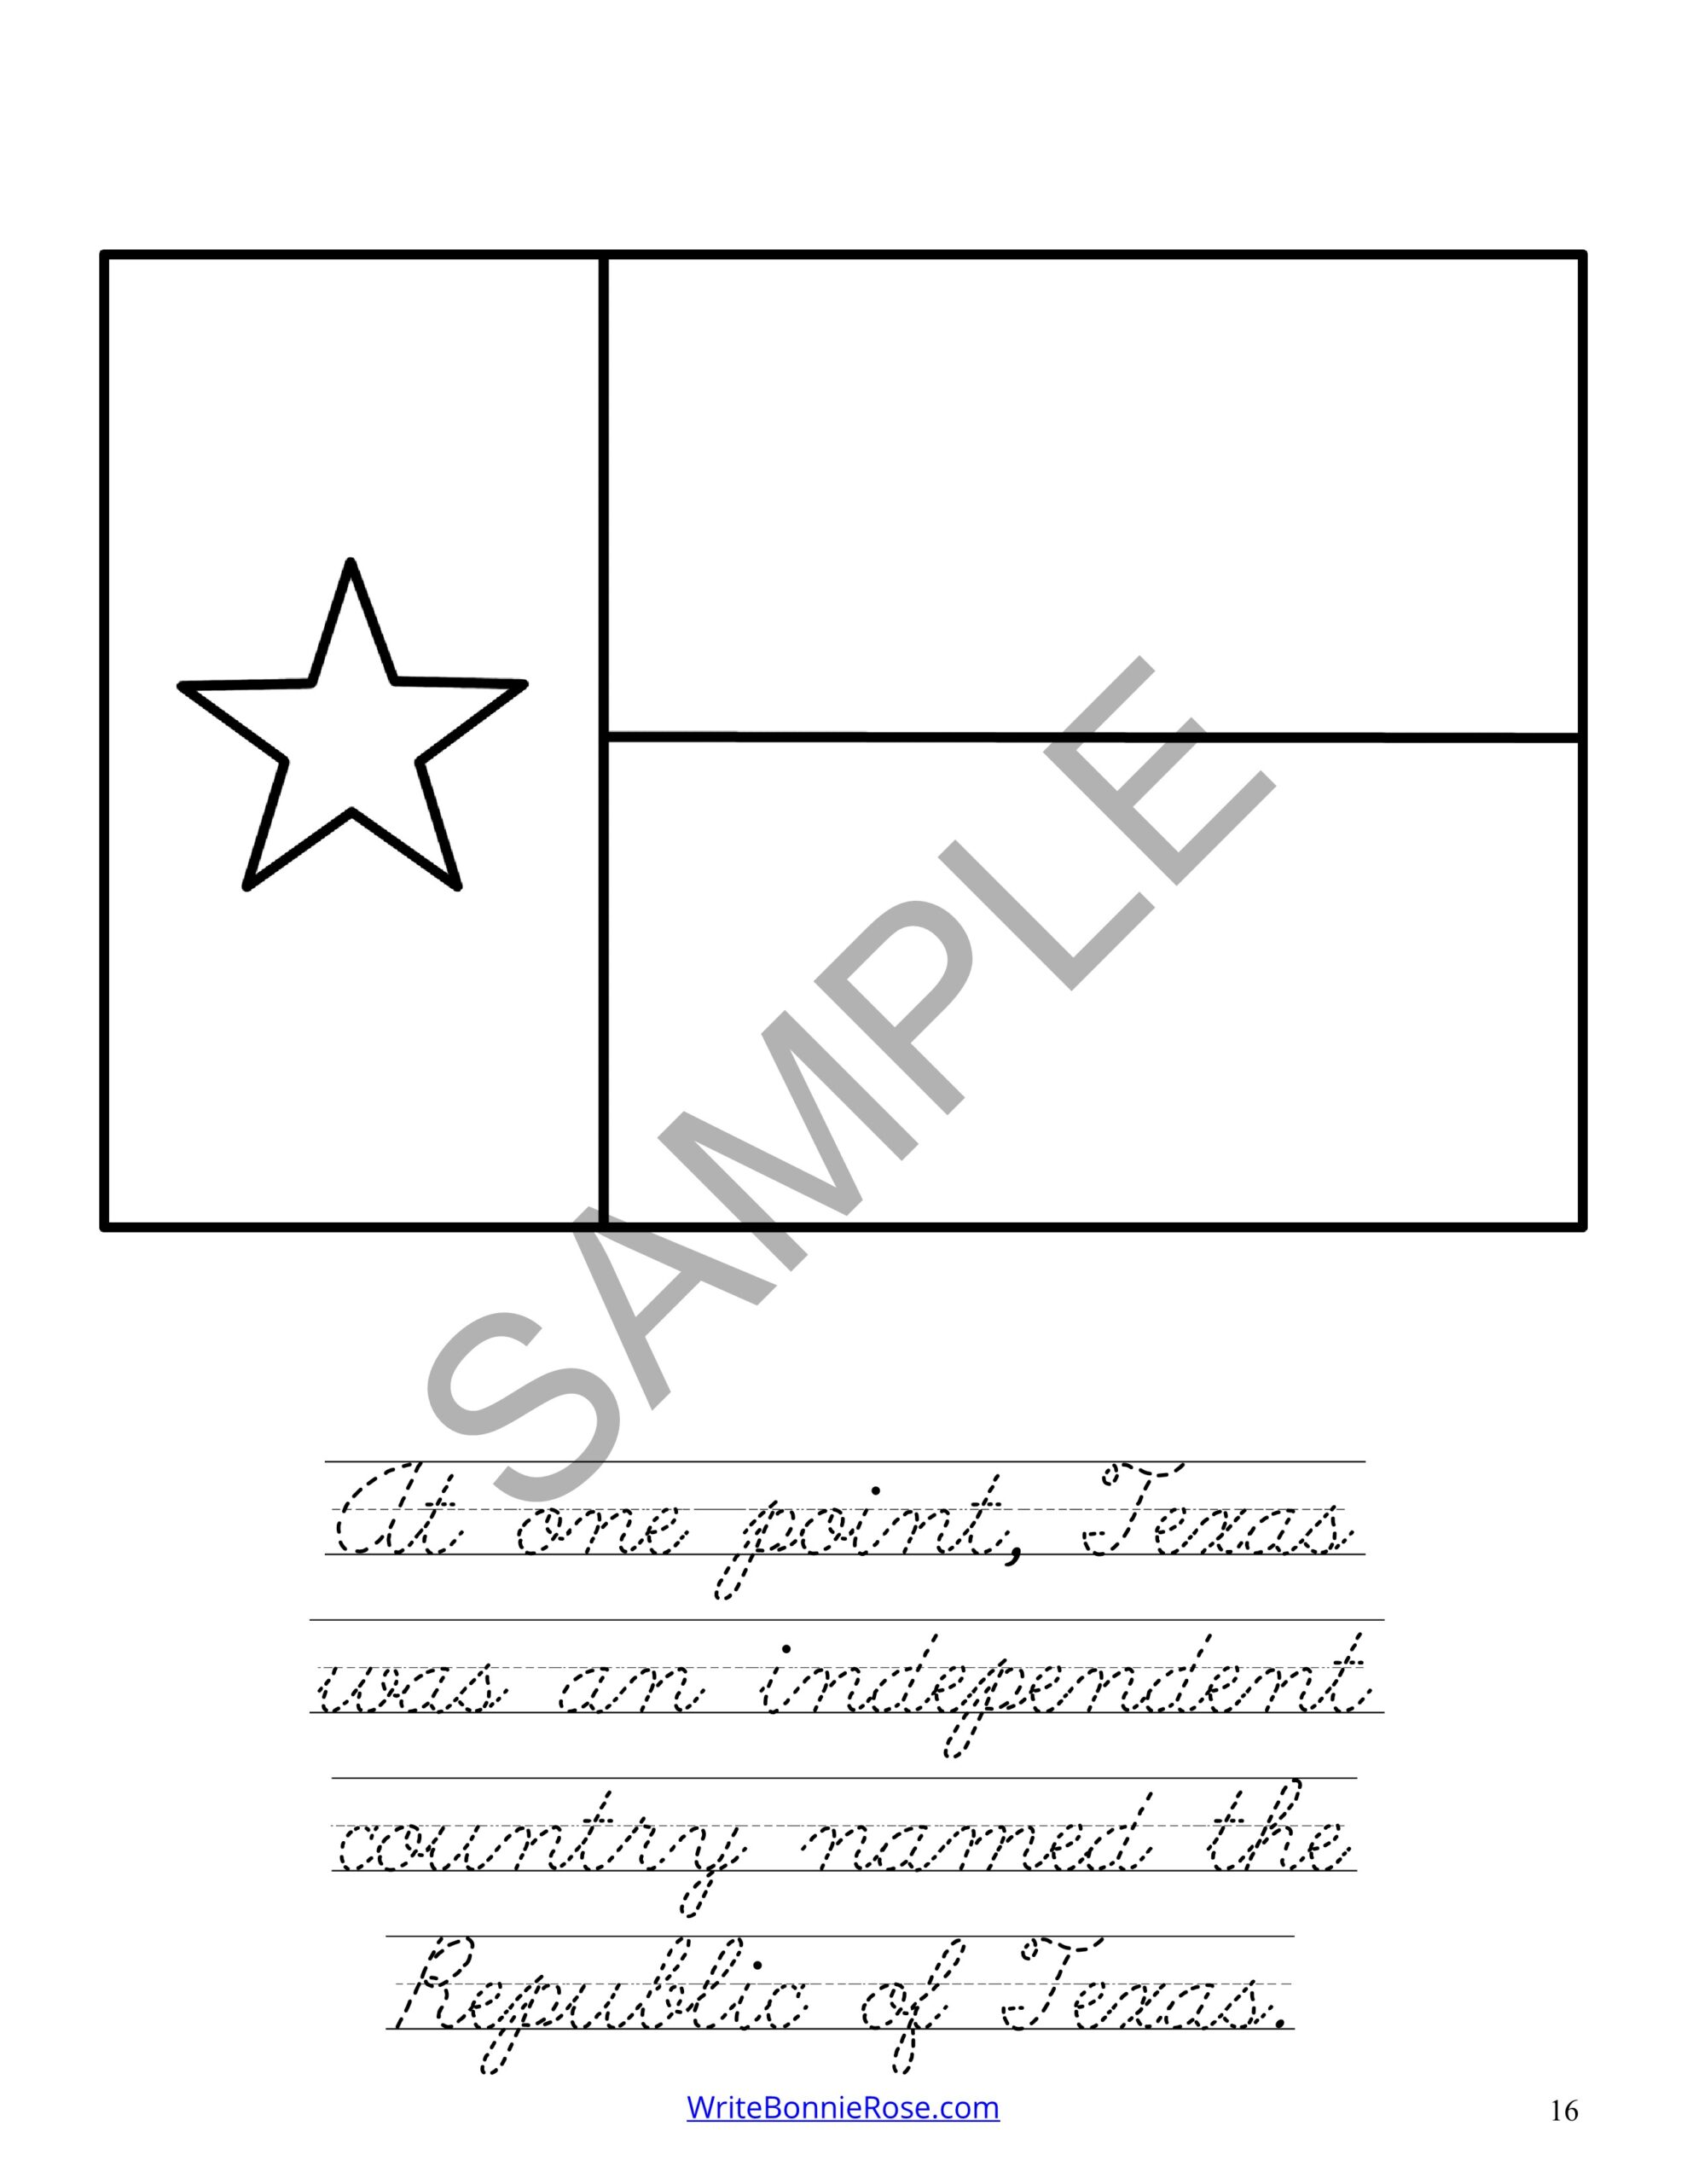 History of flags in america coloring book